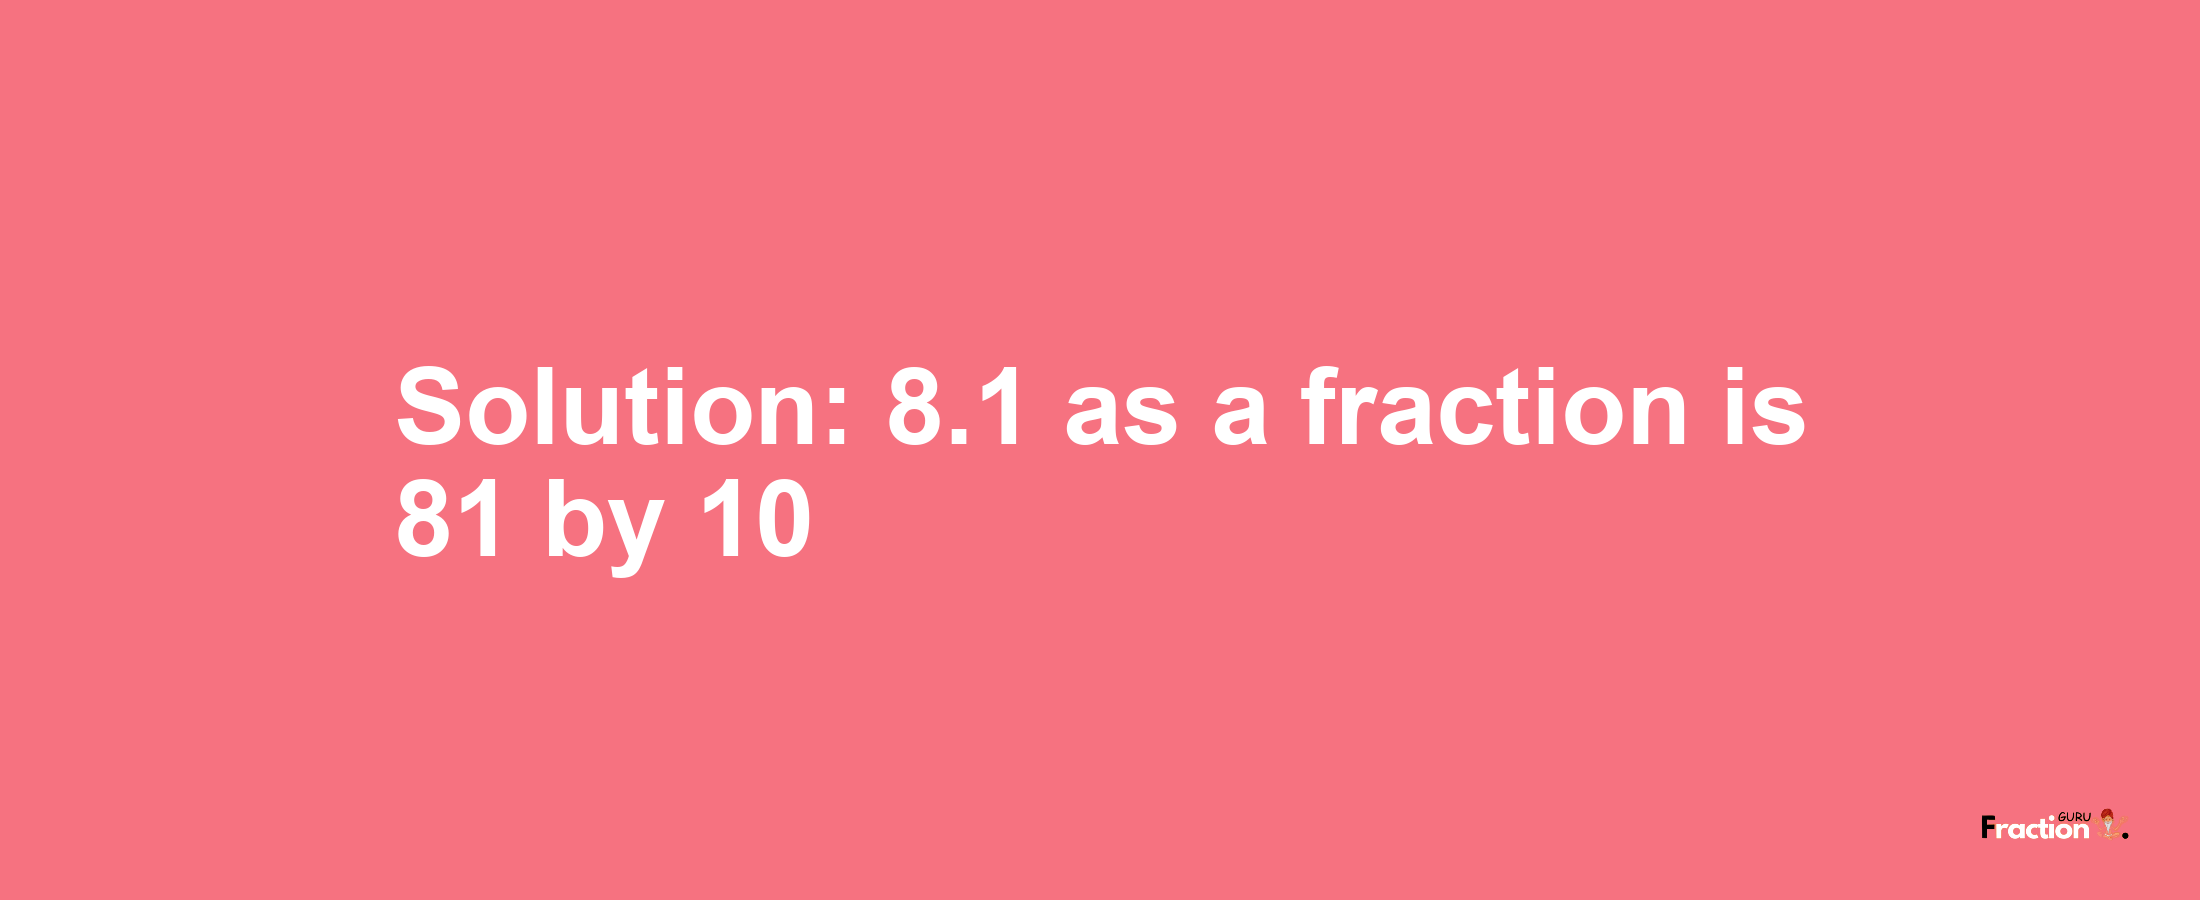 Solution:8.1 as a fraction is 81/10